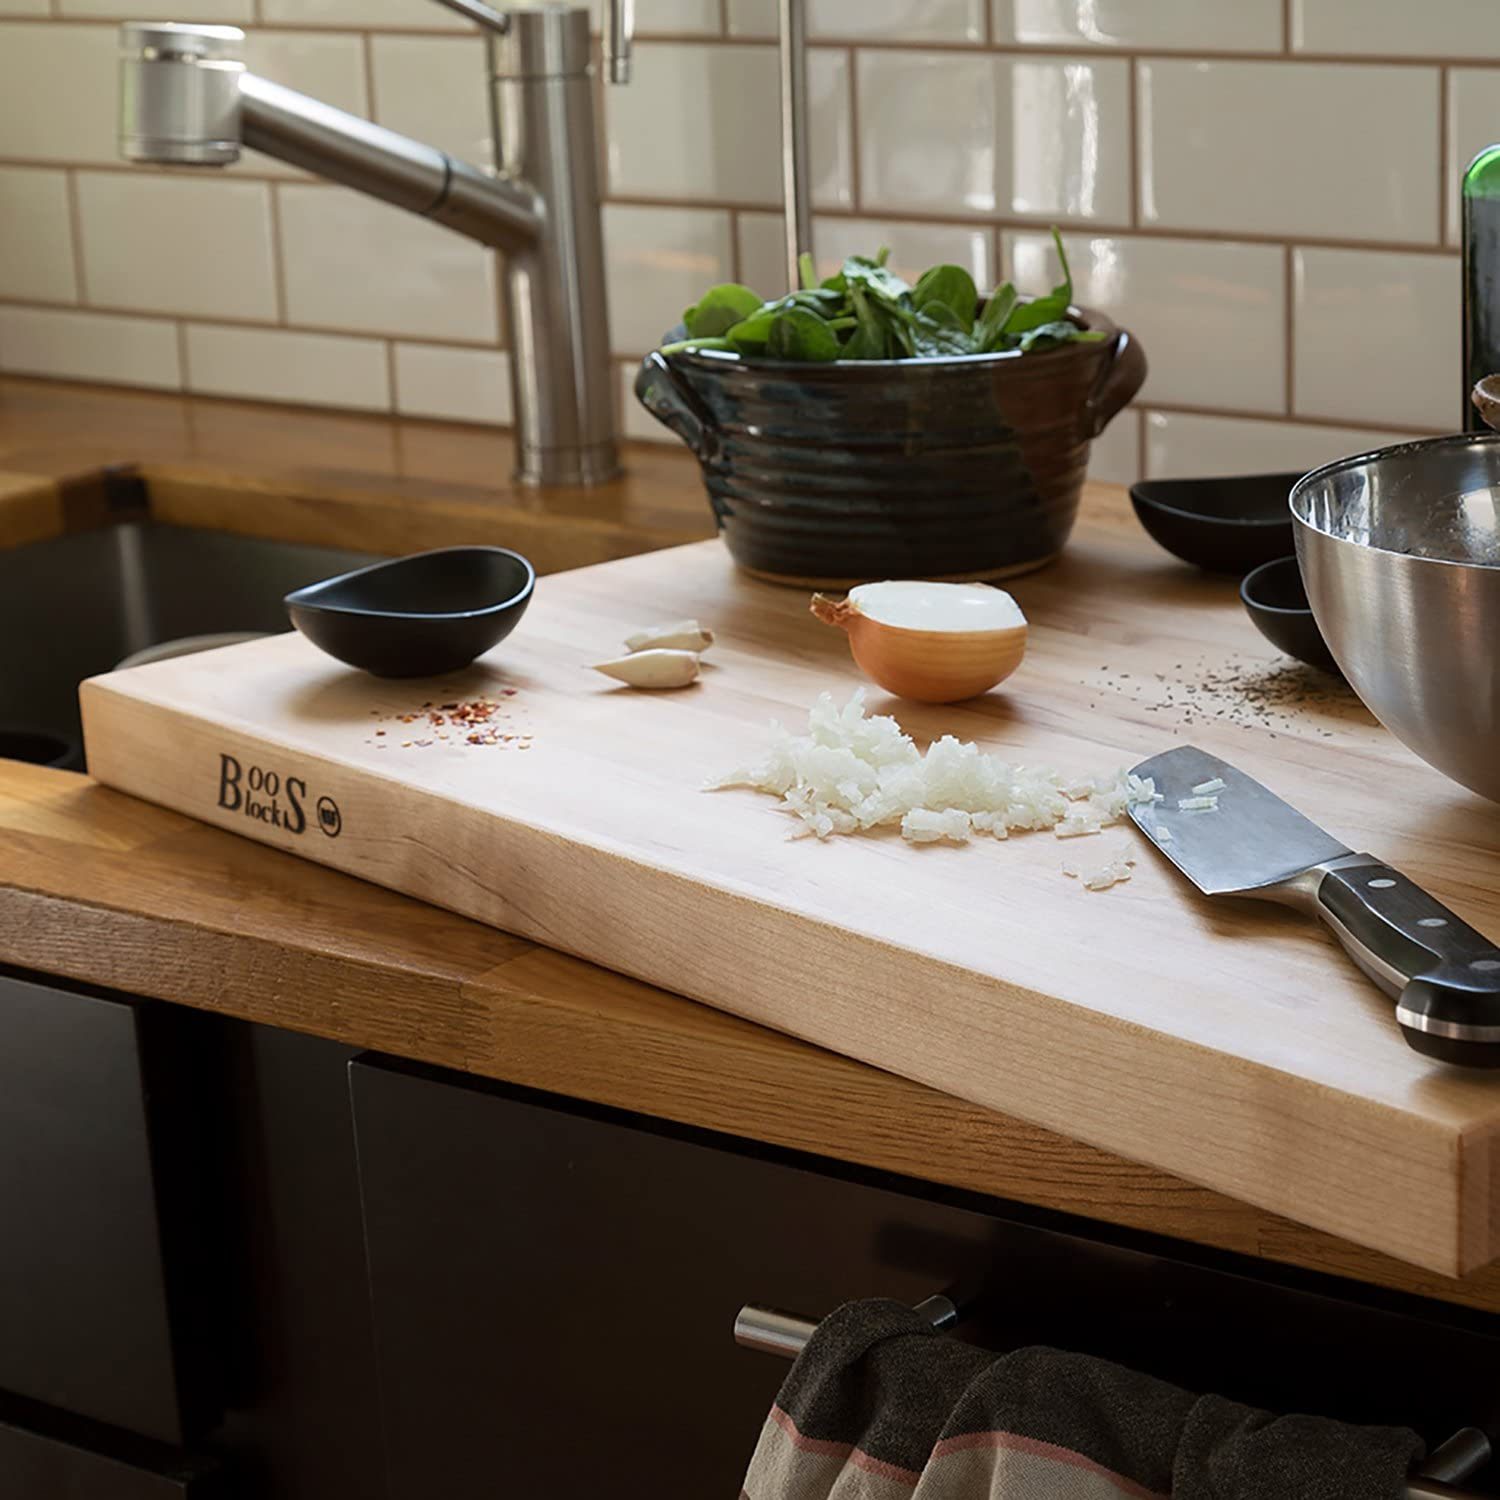 Home chefs are going gaga for kitchen gadgets